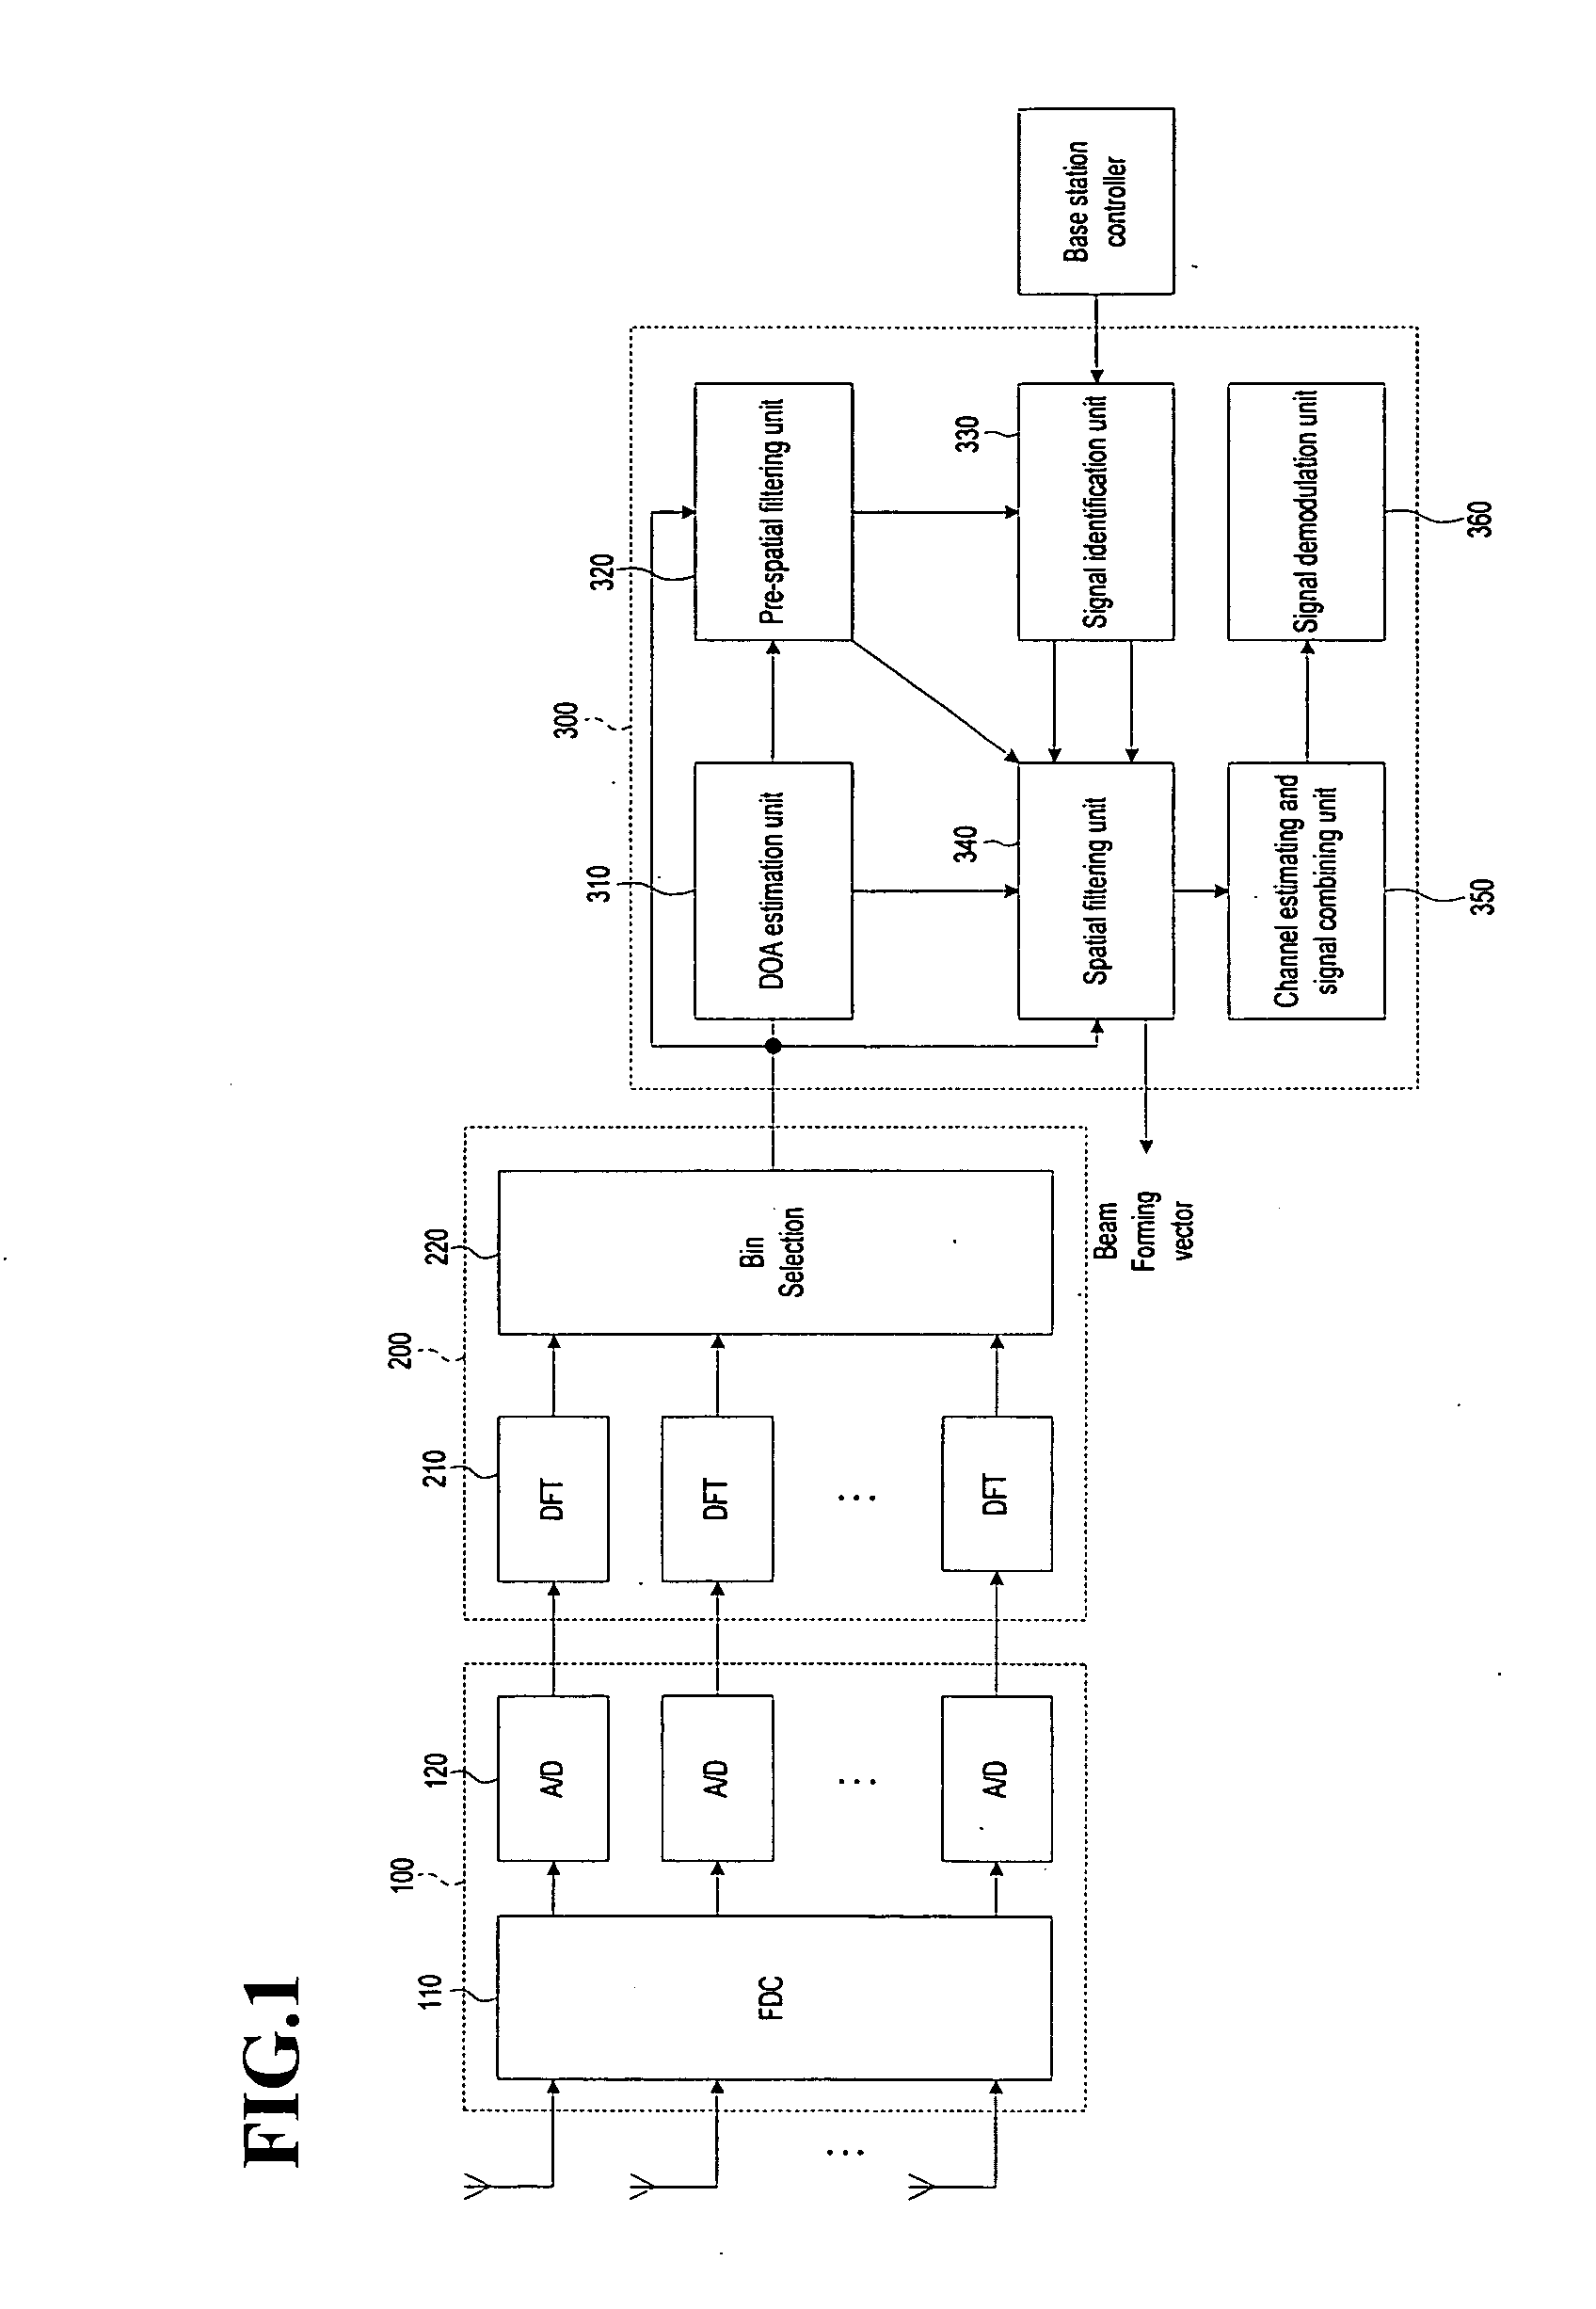 Smart antenna beamforming device in communication system and method thereof